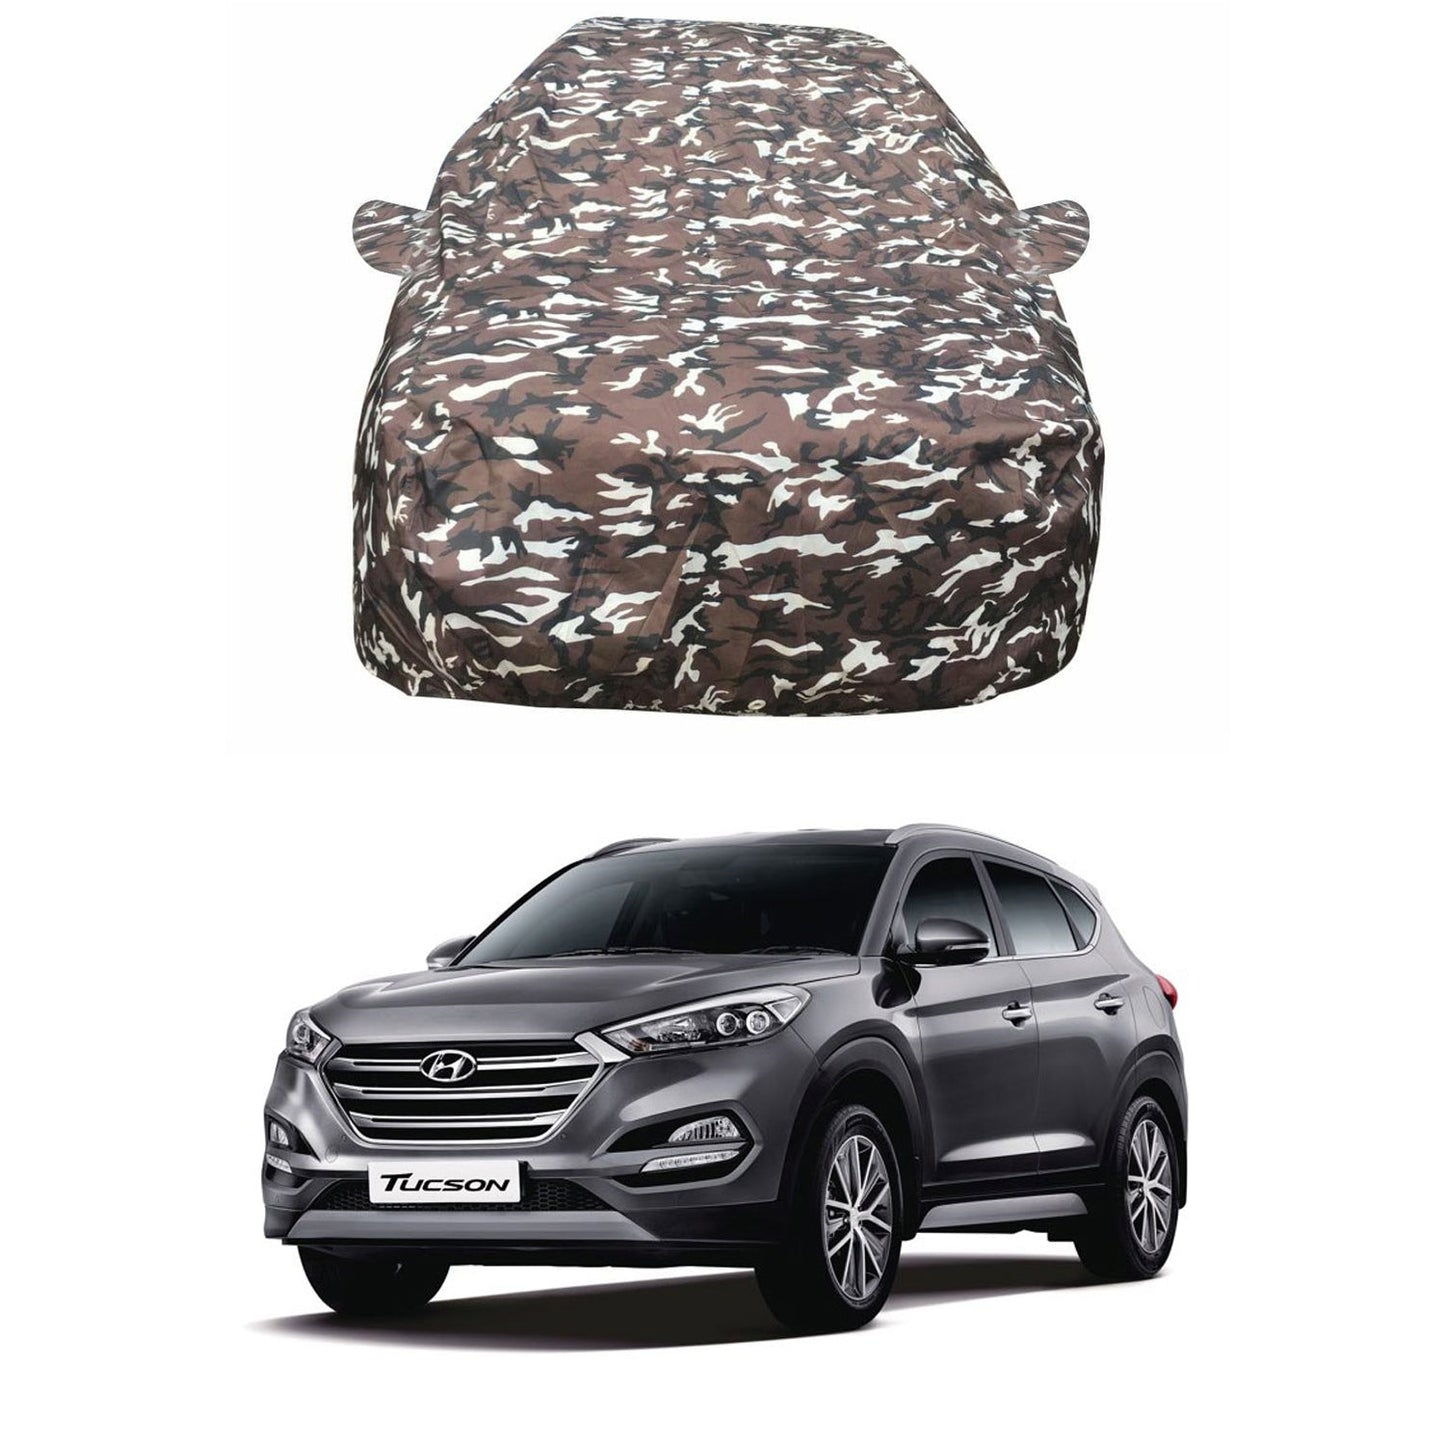 Oshotto Ranger Design Made of 100% Waterproof Fabric Multicolor Car Body Cover with Mirror Pockets For Hyundai Tucson